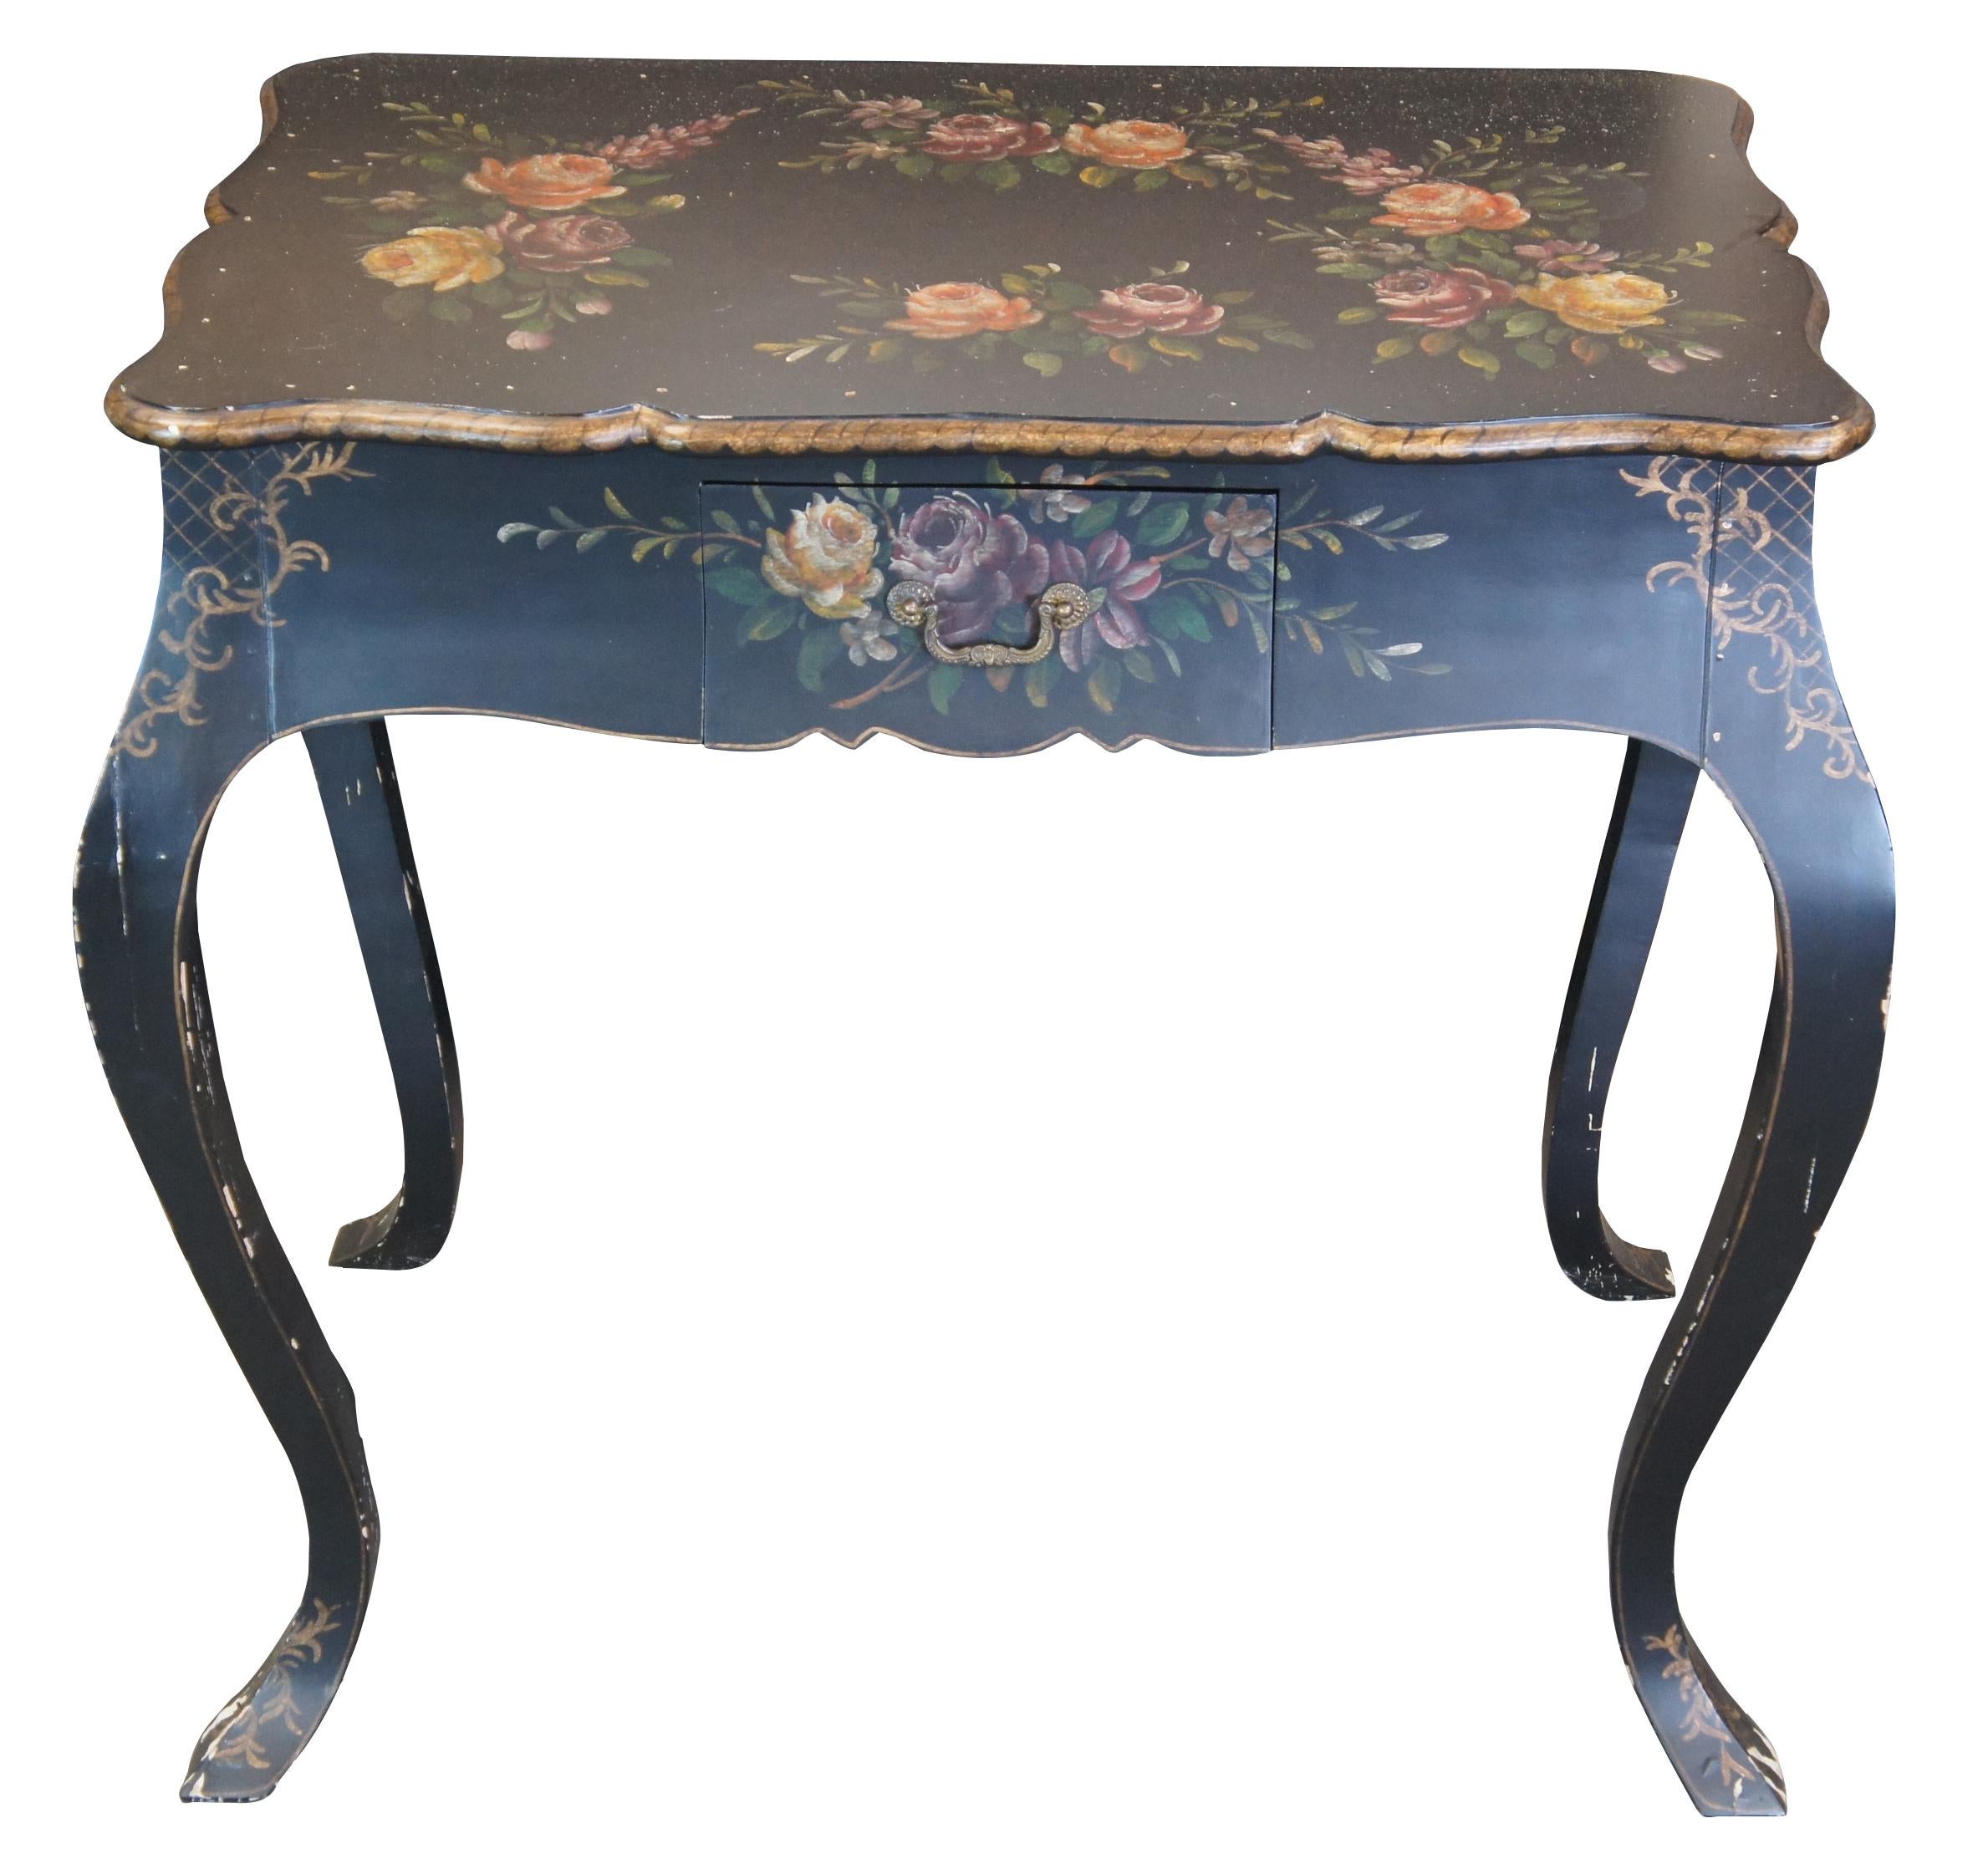 Vintage French Provincial Rococo entry console table featuring hand painted floral designs over black or ebony finish with elaborate serpentine and scalloped form and one storage drawer.

Measures: 24.5